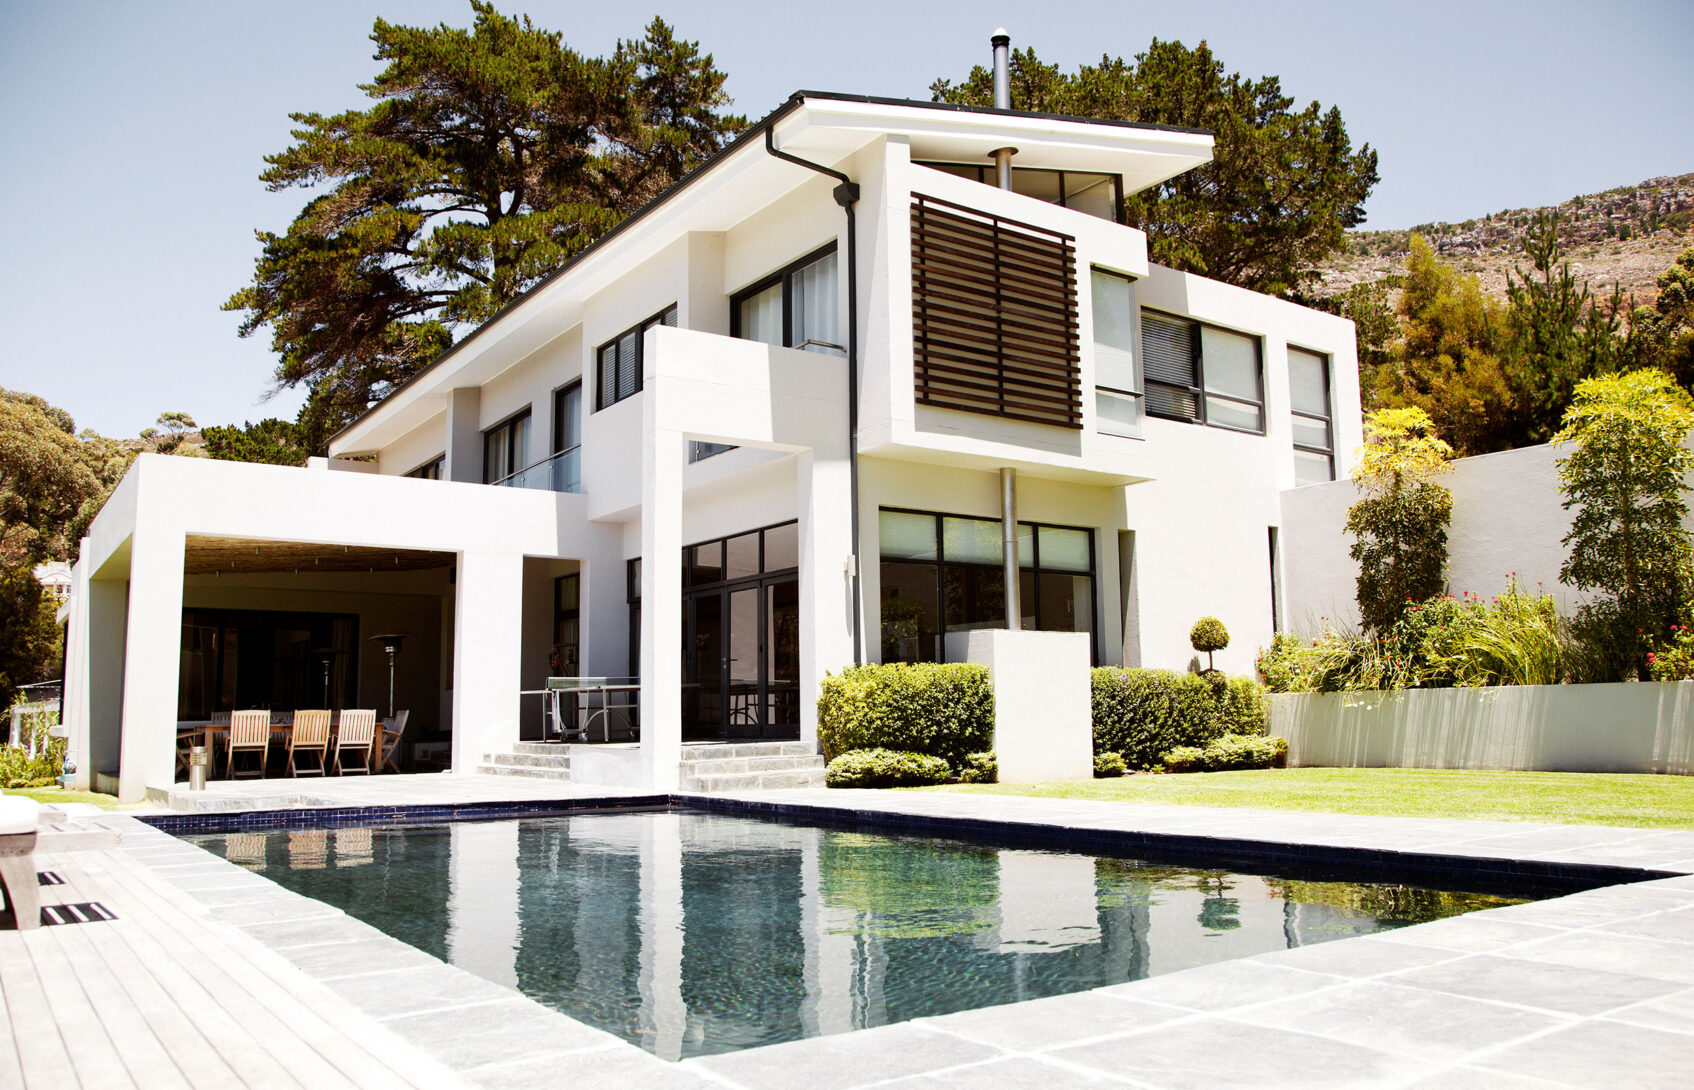 A modern, two-story international-style house with a covered patio and a pool